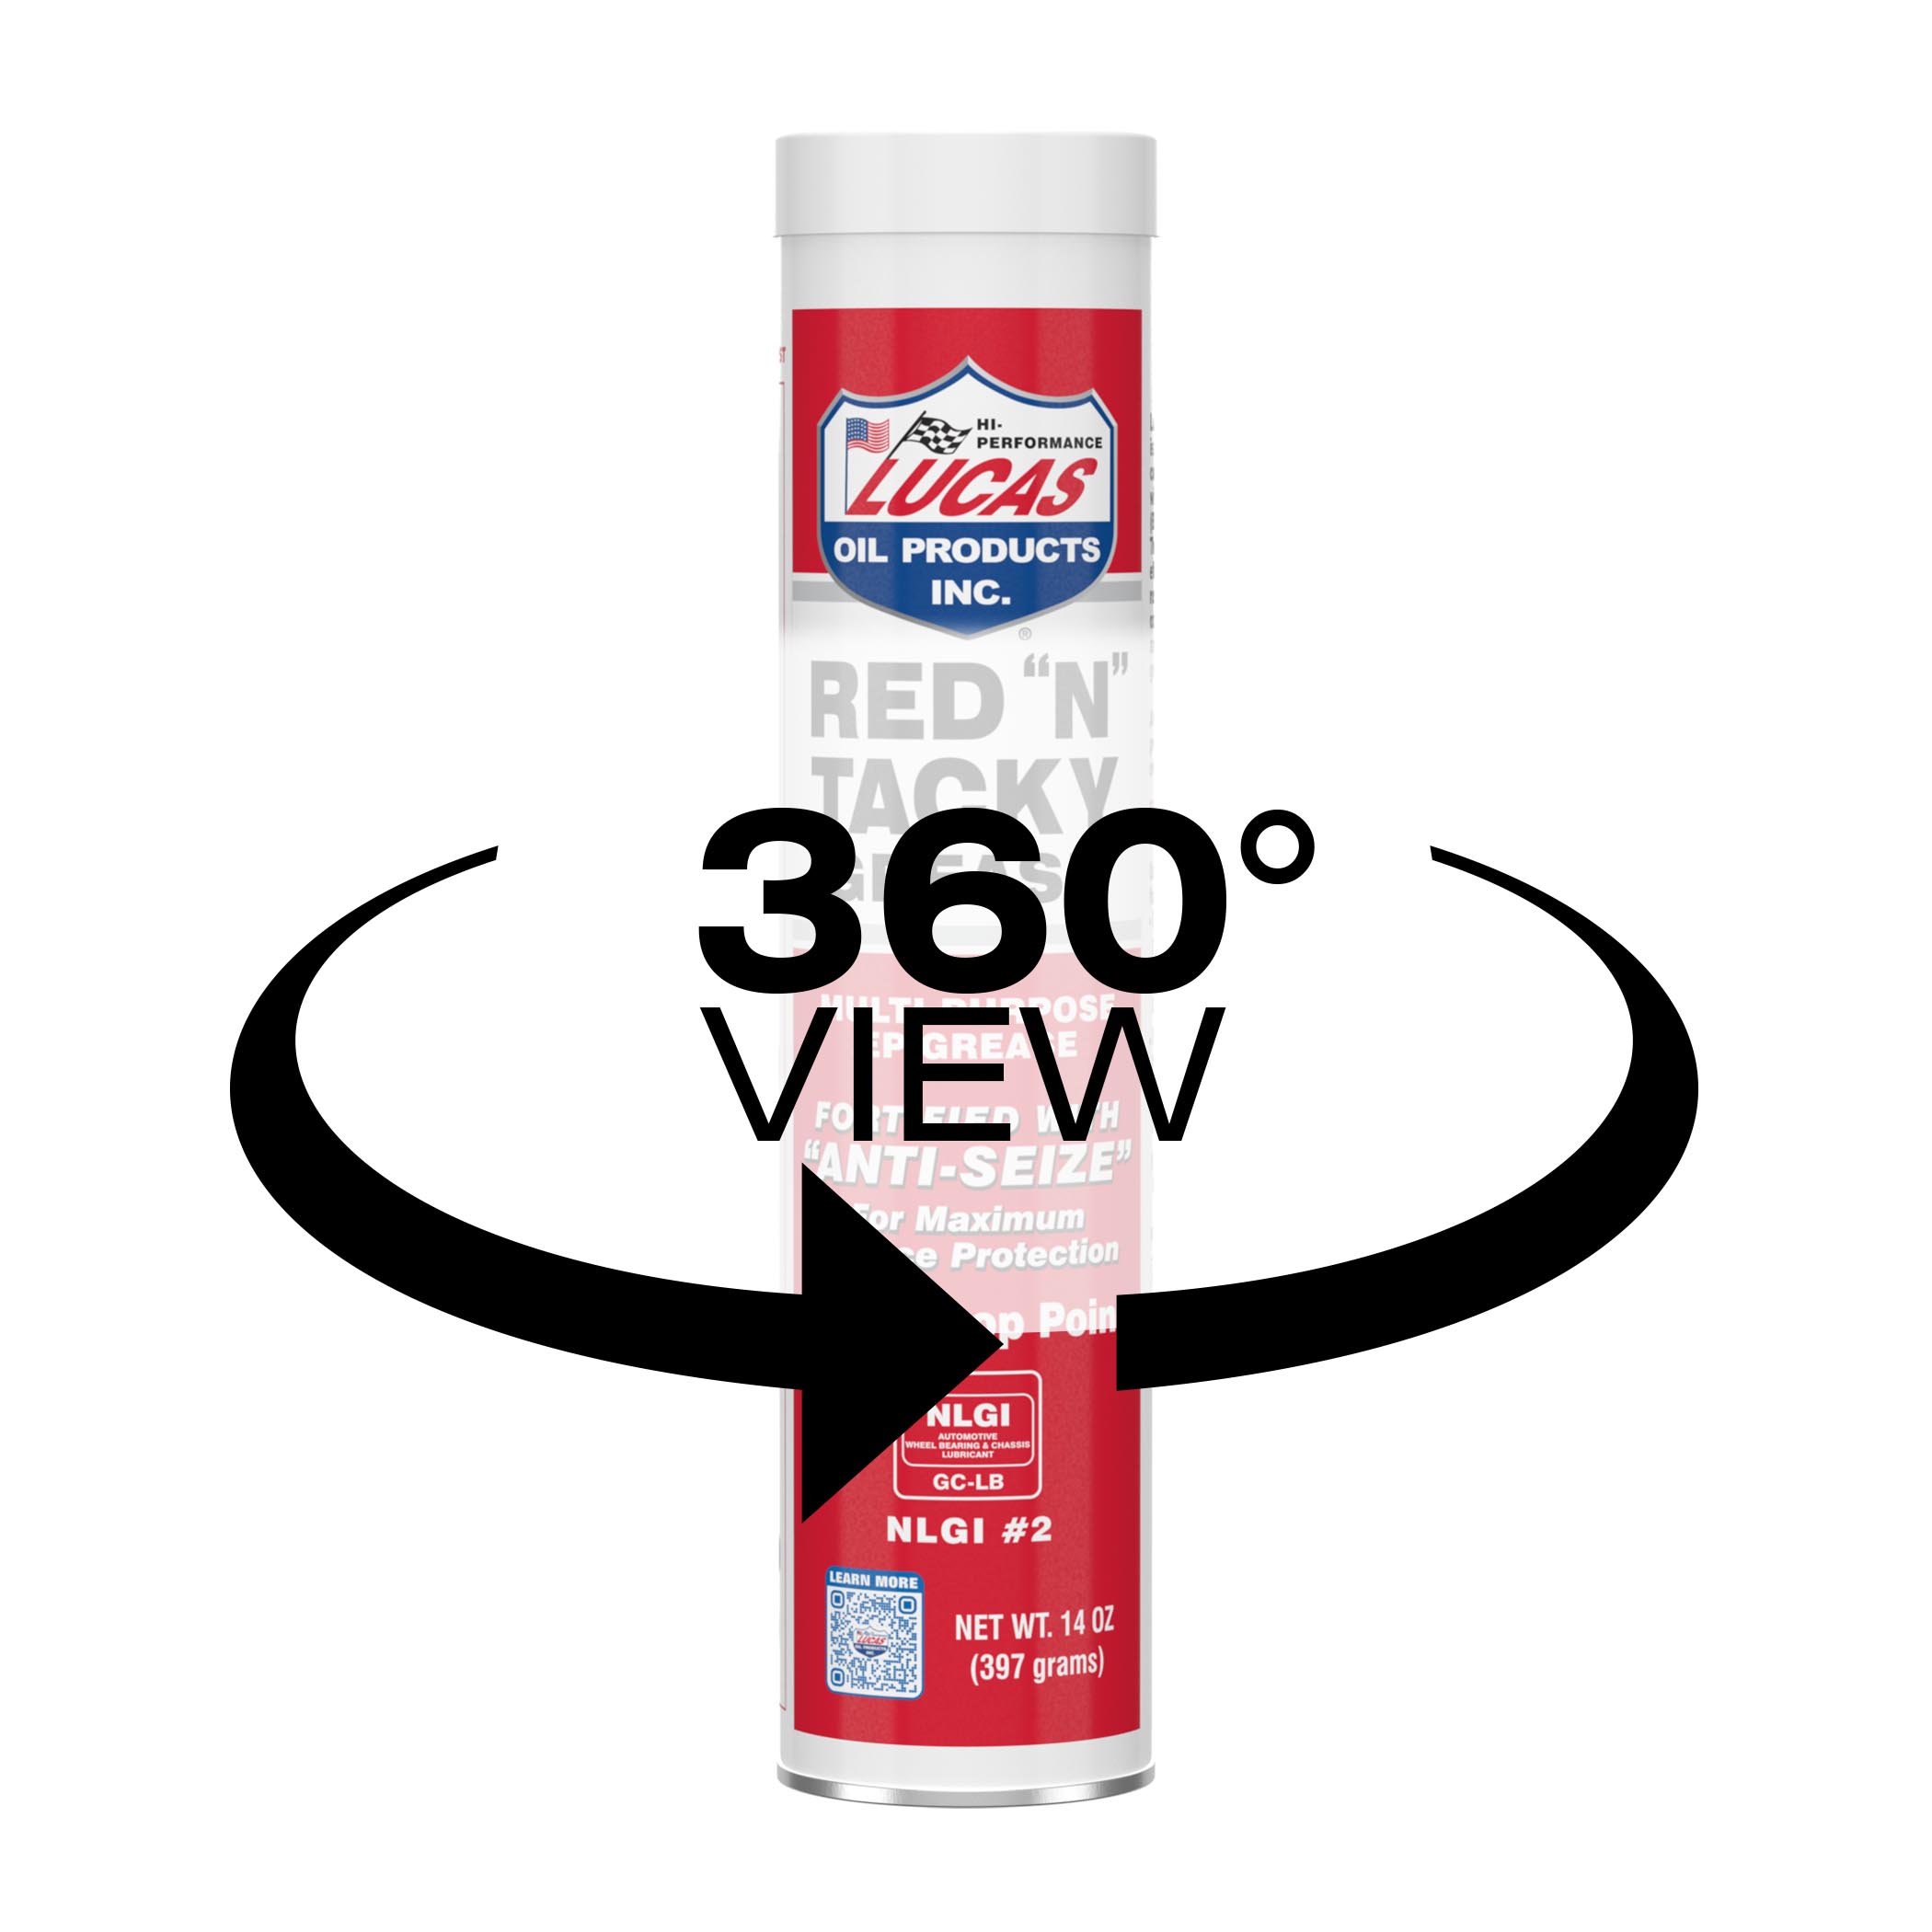 Red “N” Tacky Grease – Lucas Oil Products, Inc. – Keep That Engine